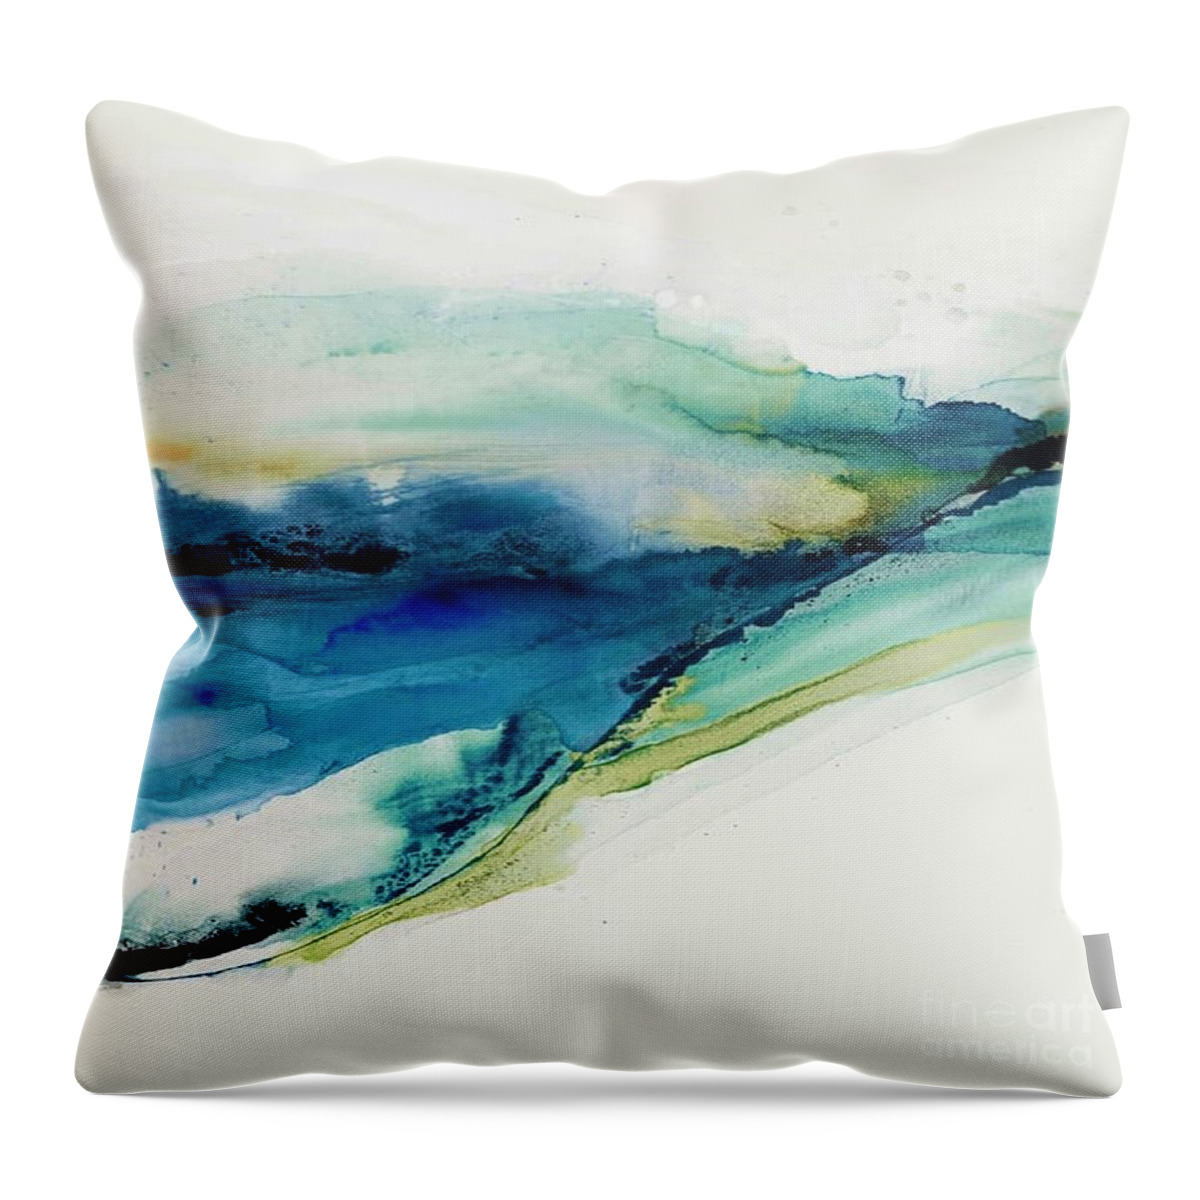 Abstract Throw Pillow featuring the painting Splendor in the sea - abstract landscape by VesnaAntic by Vesna Antic